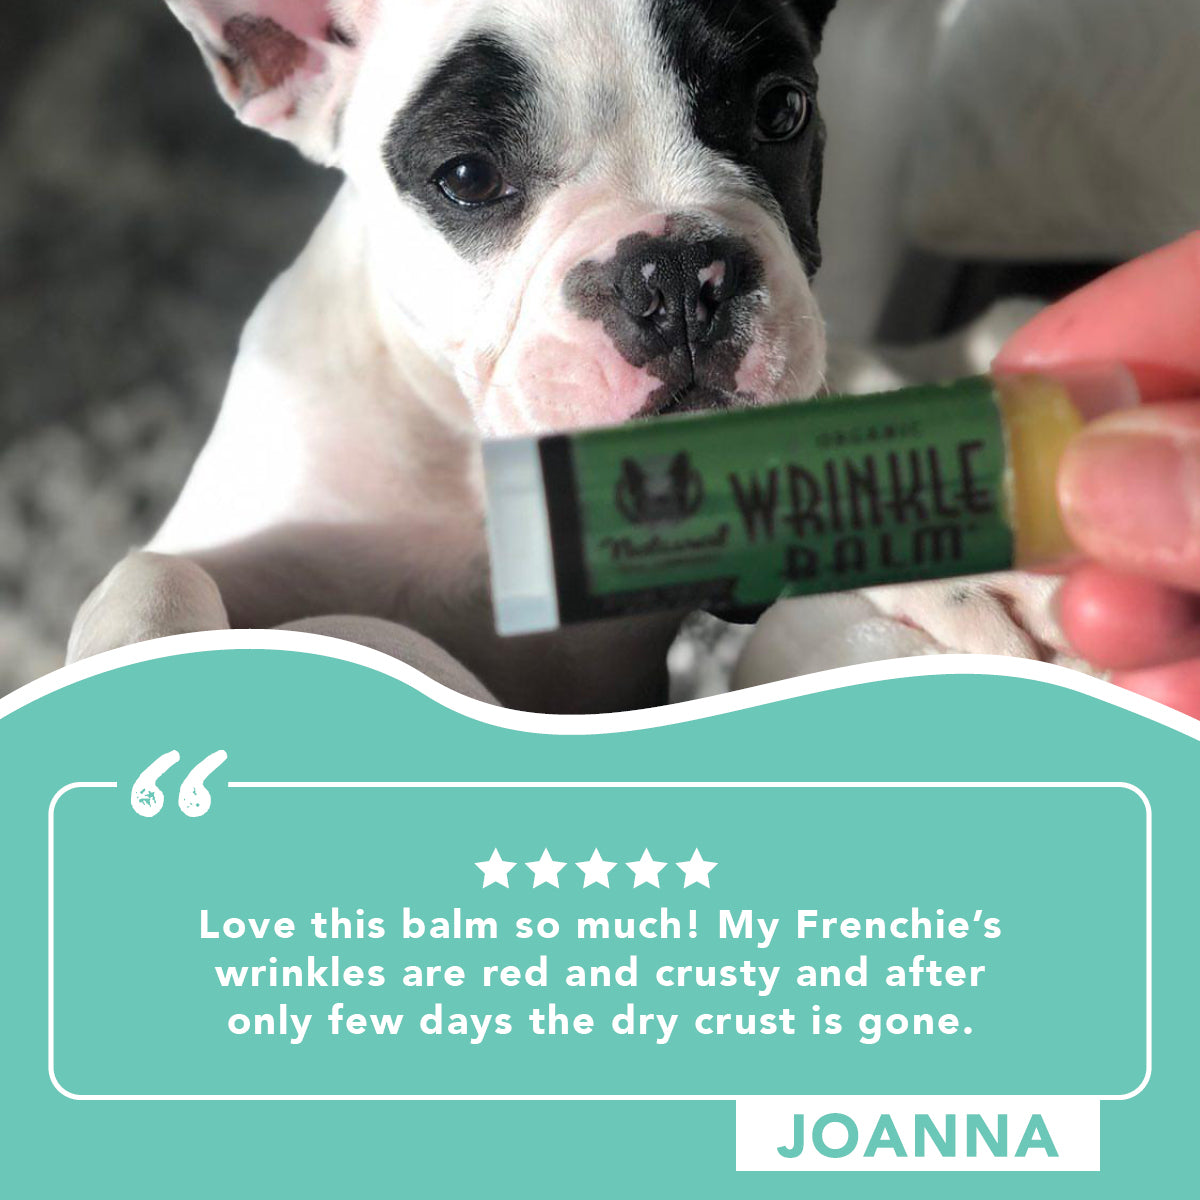 Free Wrinkle Balm Travel Stick - ONLY $3.95 For Shipping